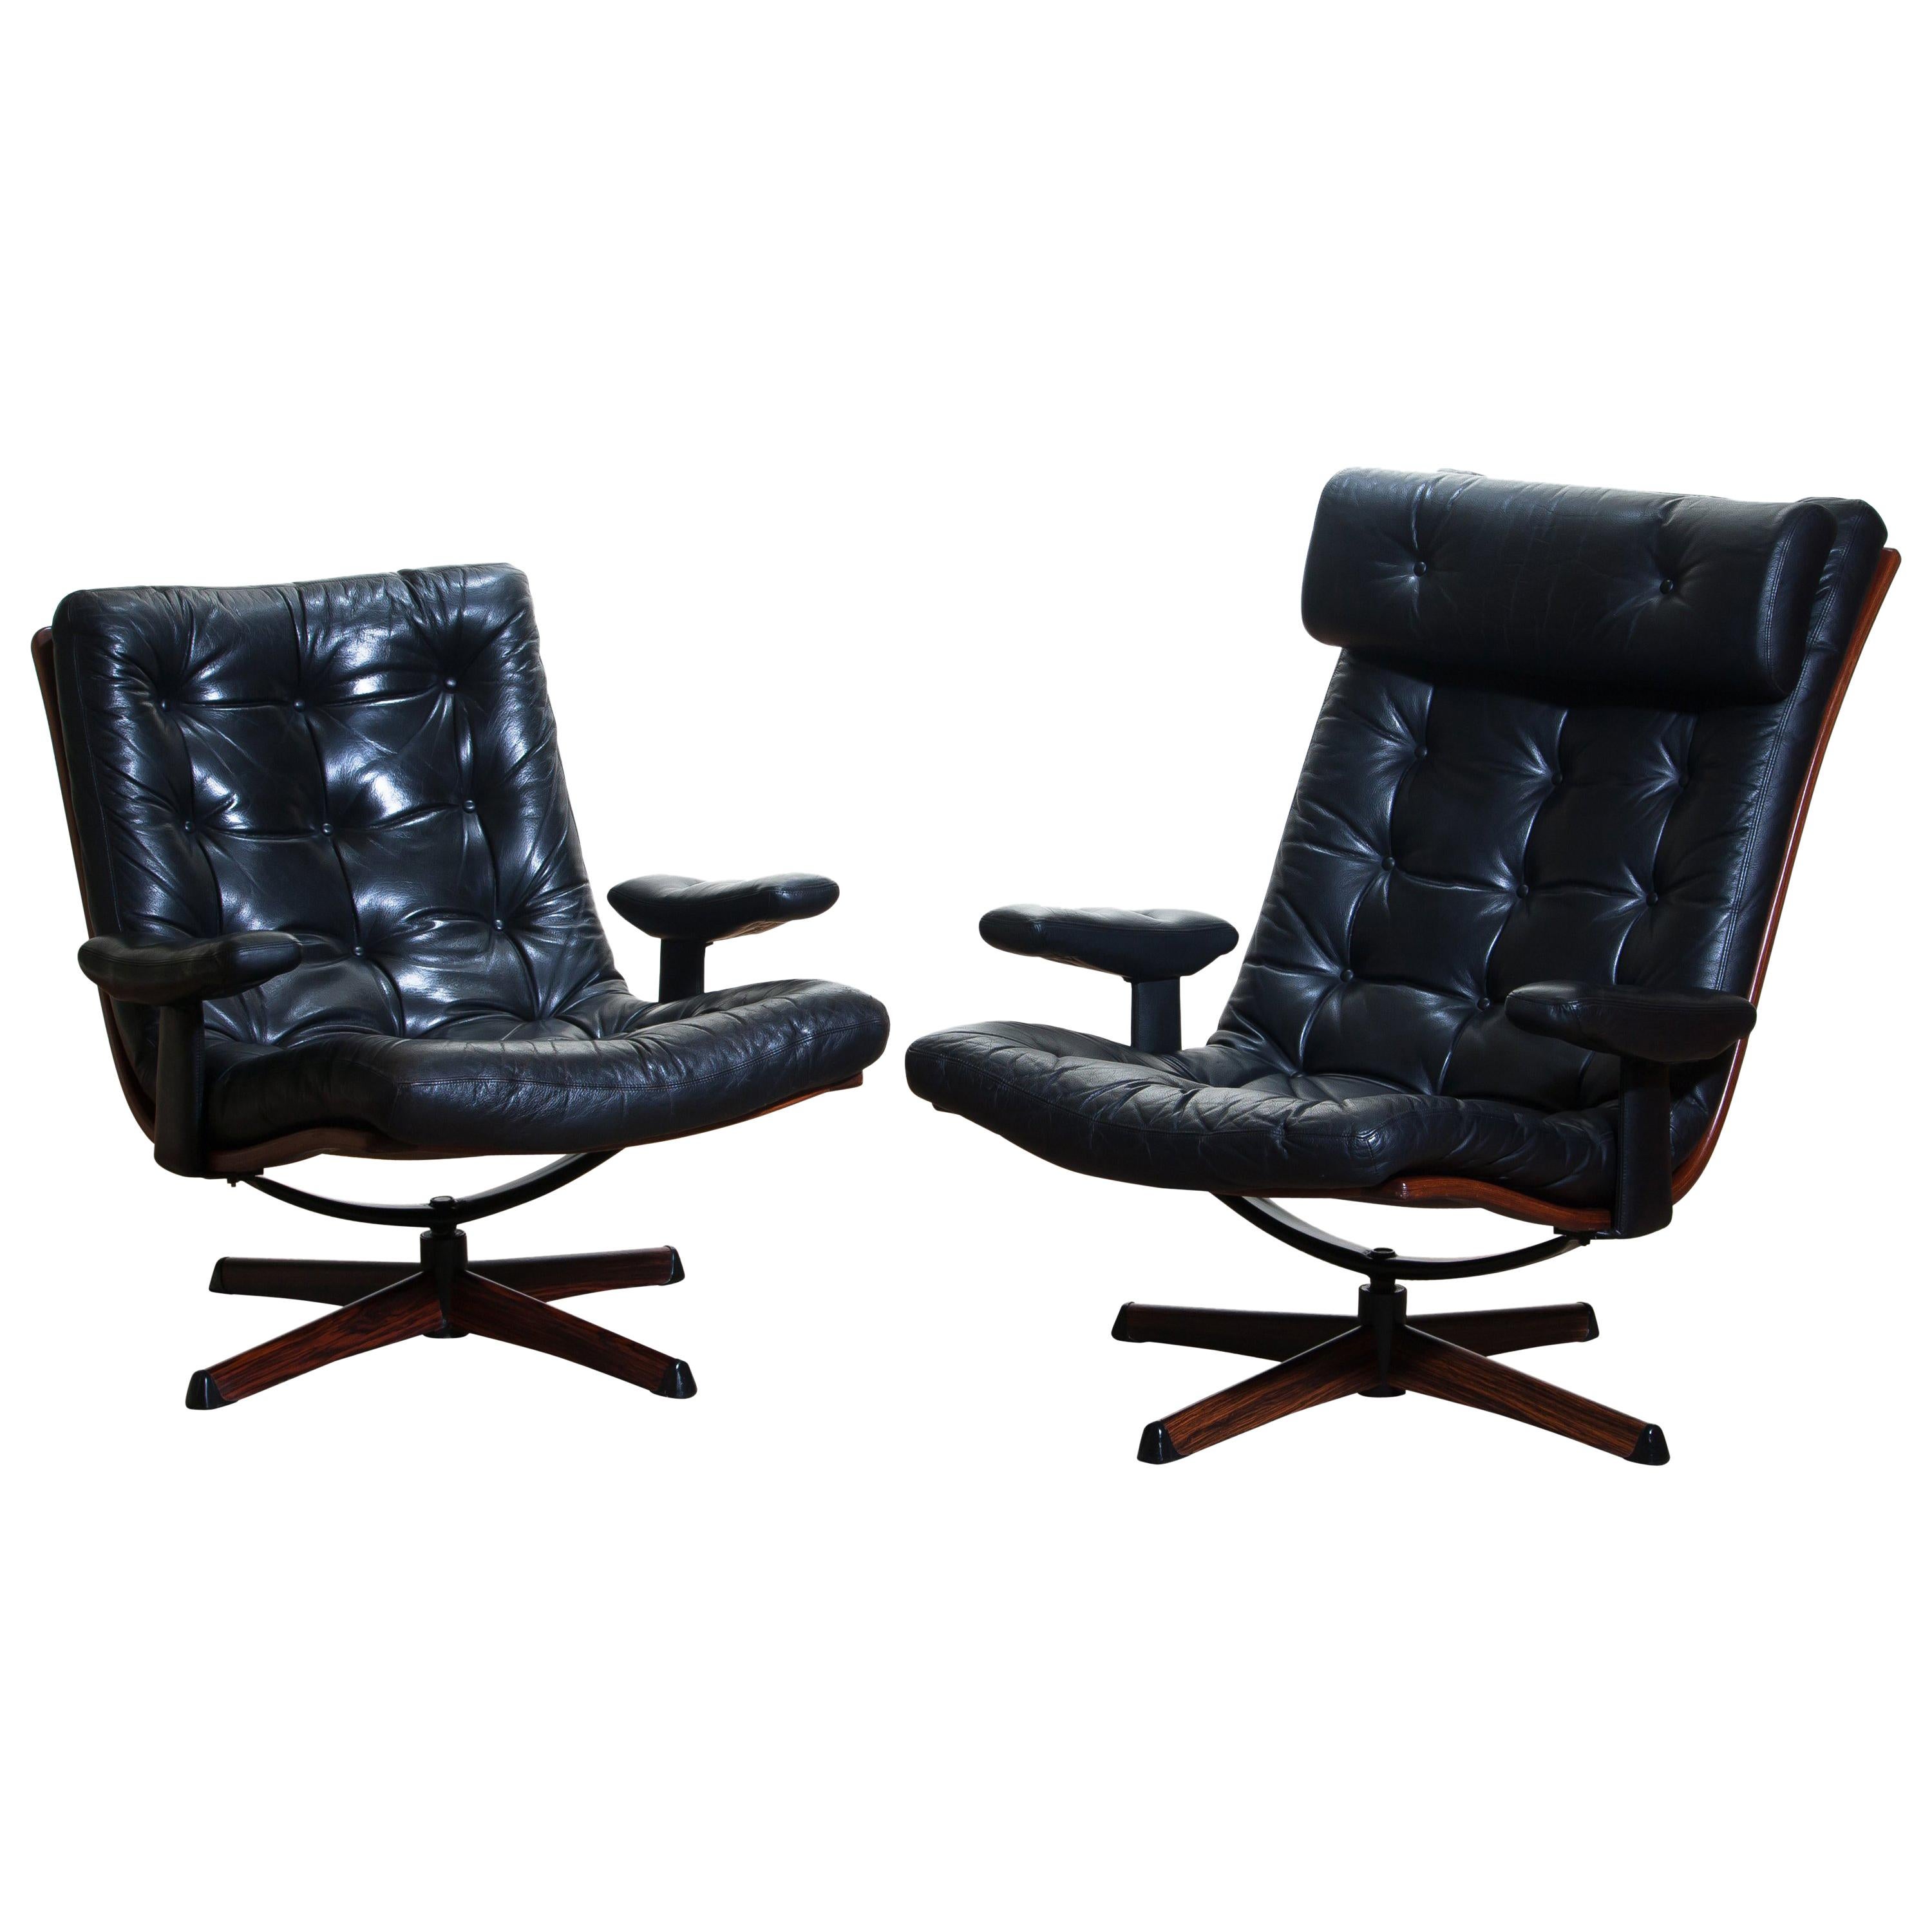 1960s Matching Pair of Black Leather Swivel Chairs by Gote Design Nassjo Sweden